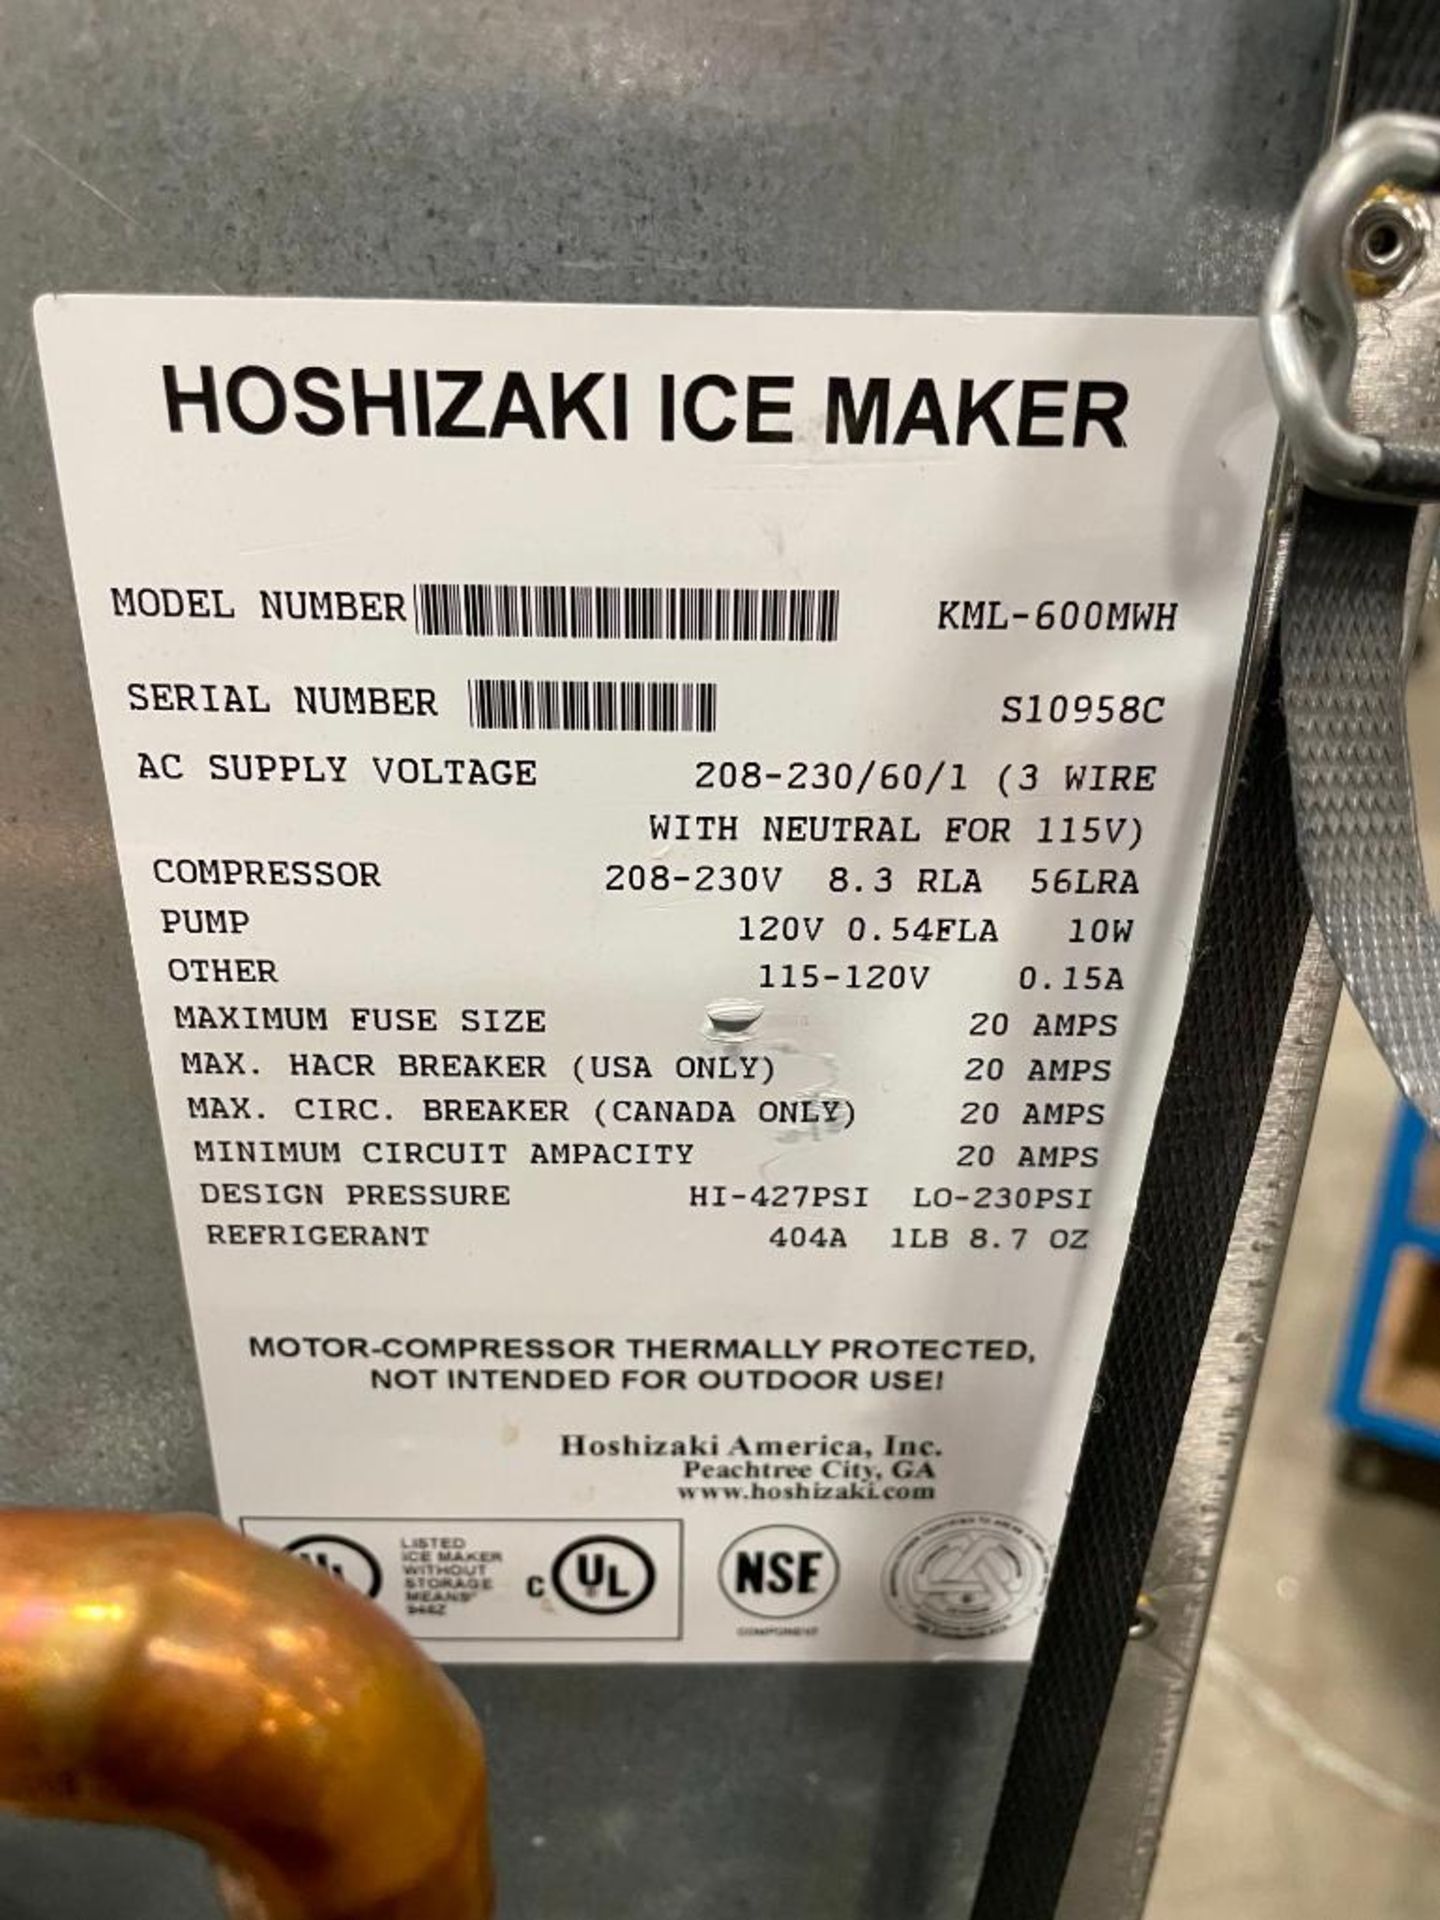 HOSHIZAKI KML-600MWH WATER COOLED 633 LBS/DAY ICE MACHINE WITH STEEL MOBILE CART - Image 5 of 8